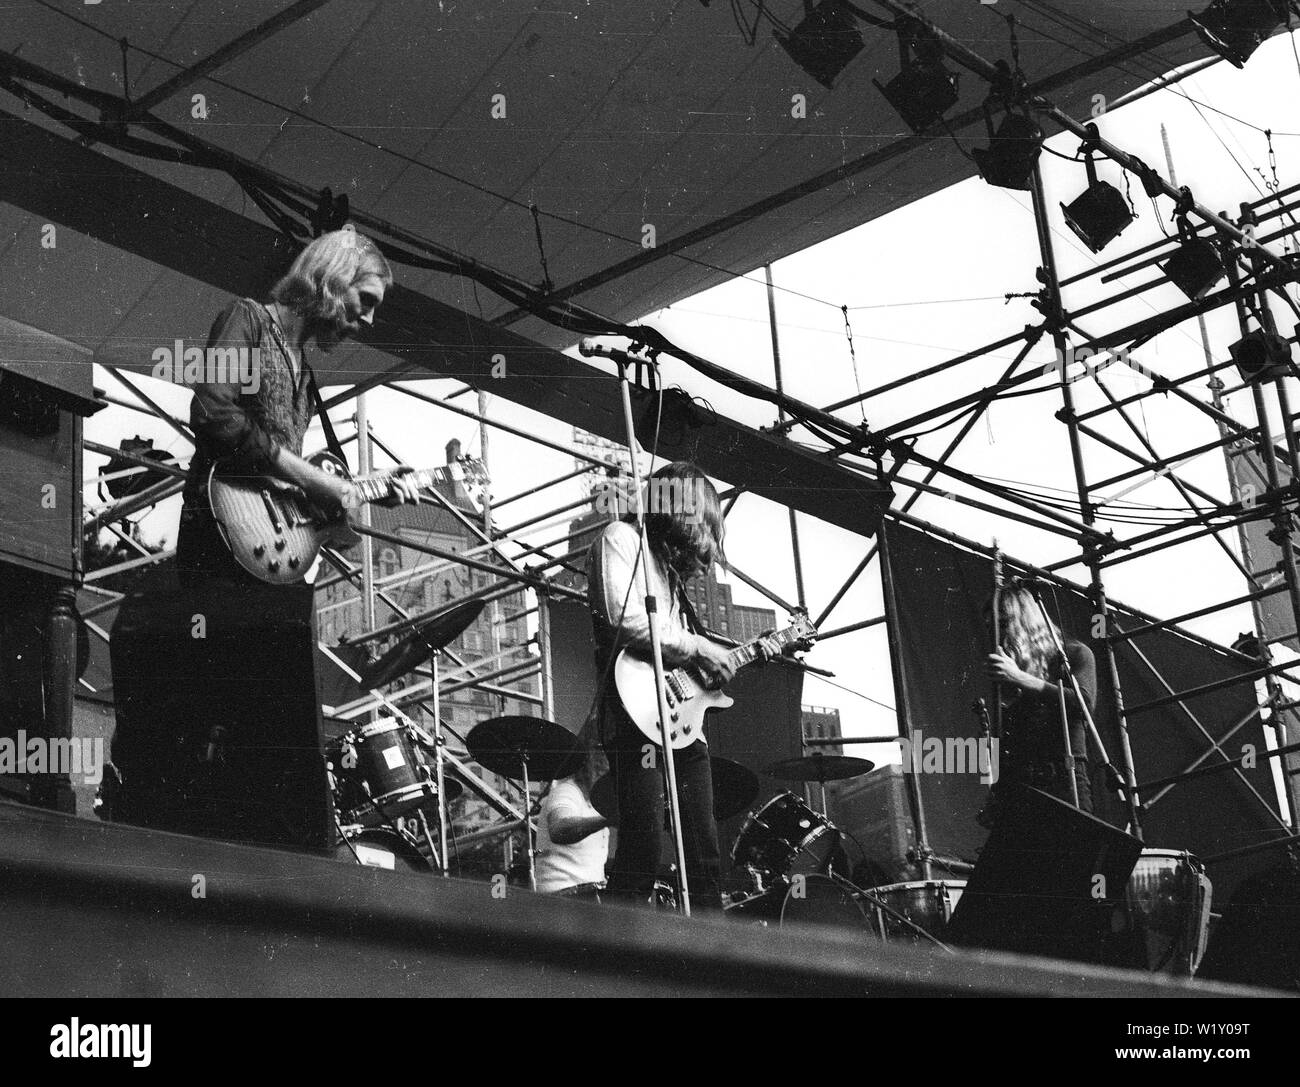 THE ALLMAN BROTHERS US rock group at bthe Schaefer Music Festival in New York's Central Park,21 July 1971 Stock Photo